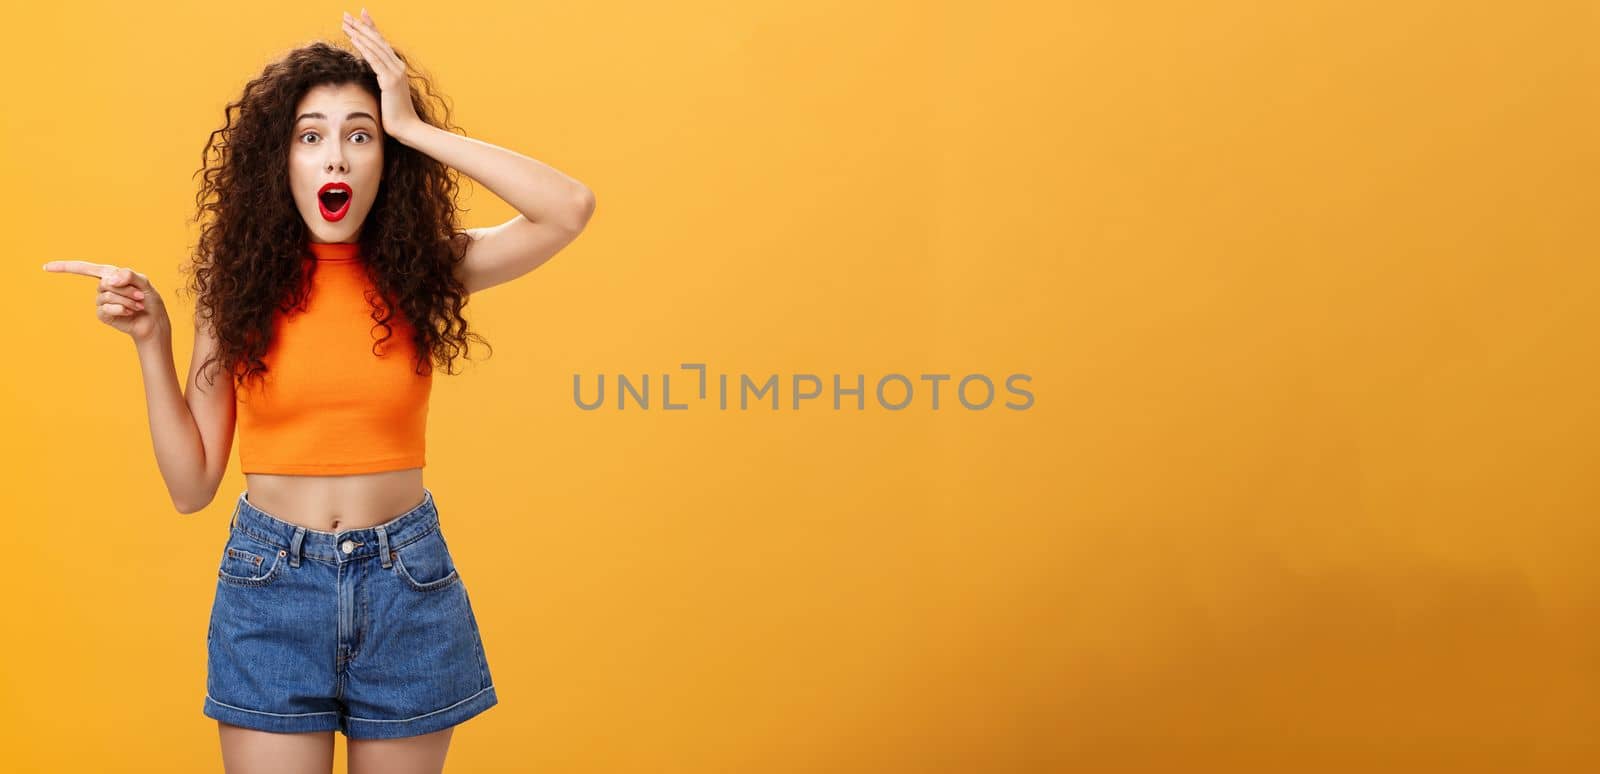 Surprised thrilled beautiful caucasian girl. with curly hairstyle in red lipstic and orange cropped top holding hand on head amazed and pointing left questioned and astonished over studio background.